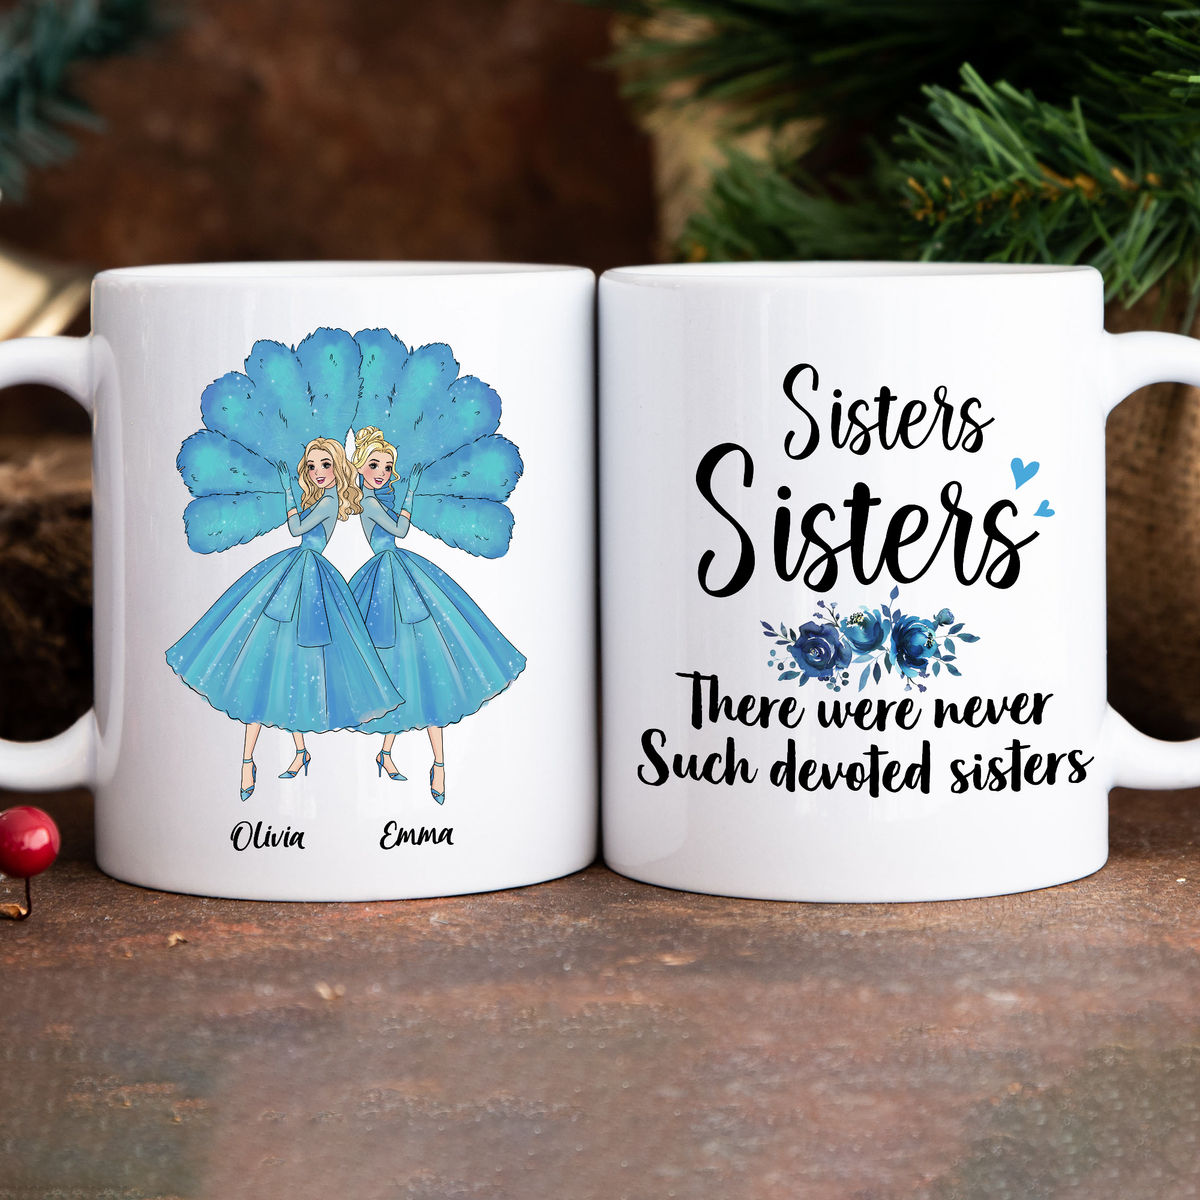 Personalized Mug For Sisters - Sisters Sisters - White Christmas - Up To 5 Woman, gift for her, gift for sisters (58095) - Personalized Mug_5